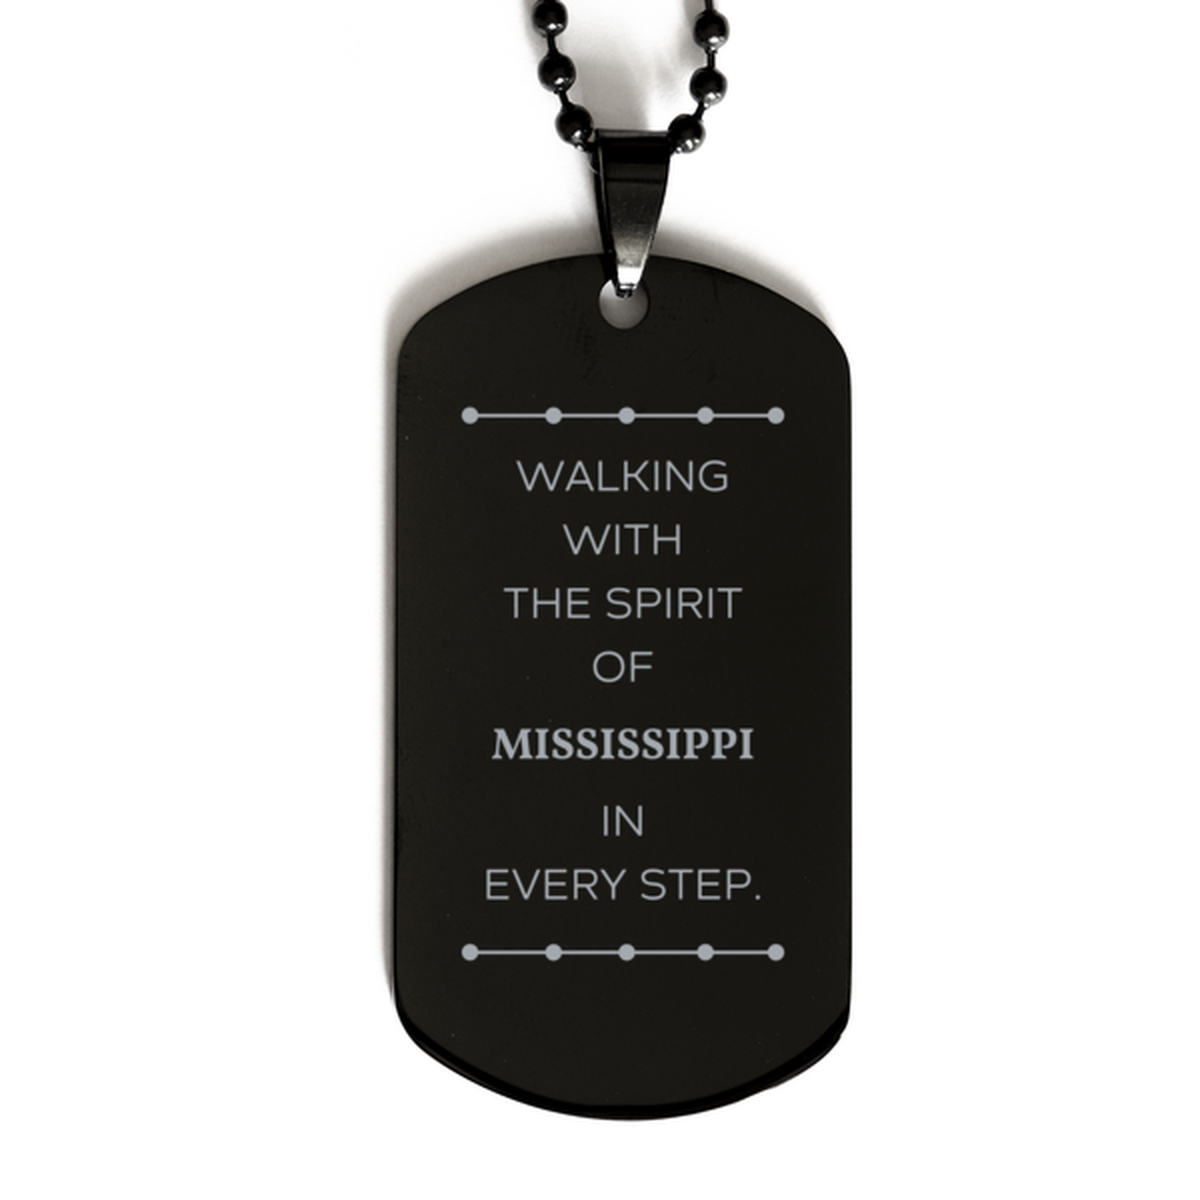 Mississippi Gifts, Walking with the spirit, Love Mississippi Birthday Christmas Black Dog Tag For Mississippi People, Men, Women, Friends